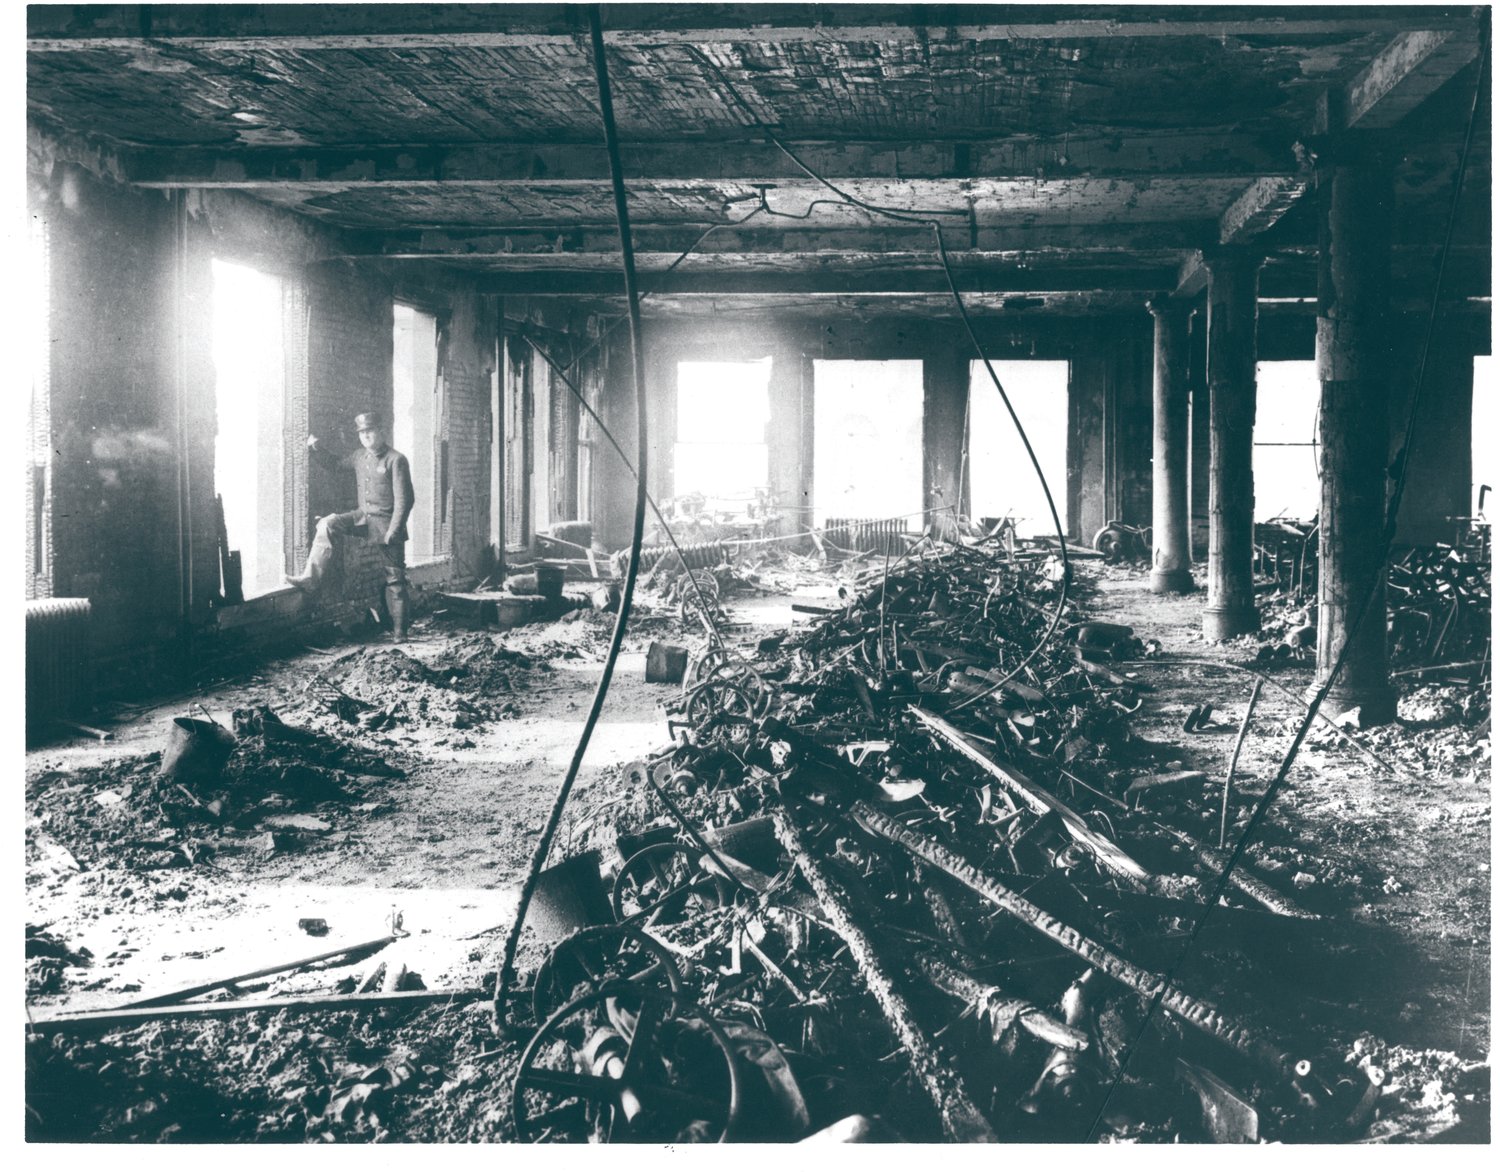 The Asch Building, completed in 190, was advertised as fireproof. But a lit match or cigarette in an eighth-floor scrap bin sparked flames that leaped to wooden floors on the ninth and 10th floors. The fire would kill 146 seamstresses and other garment workers on March 25, 1911. Following years of concerted effort by the Remember the Triangle Fire Coalition, a memorial will be installed later this year on the facade of the renamed Brown Building on the northwest corner of Greene Street and Washington Place in Manhattan.